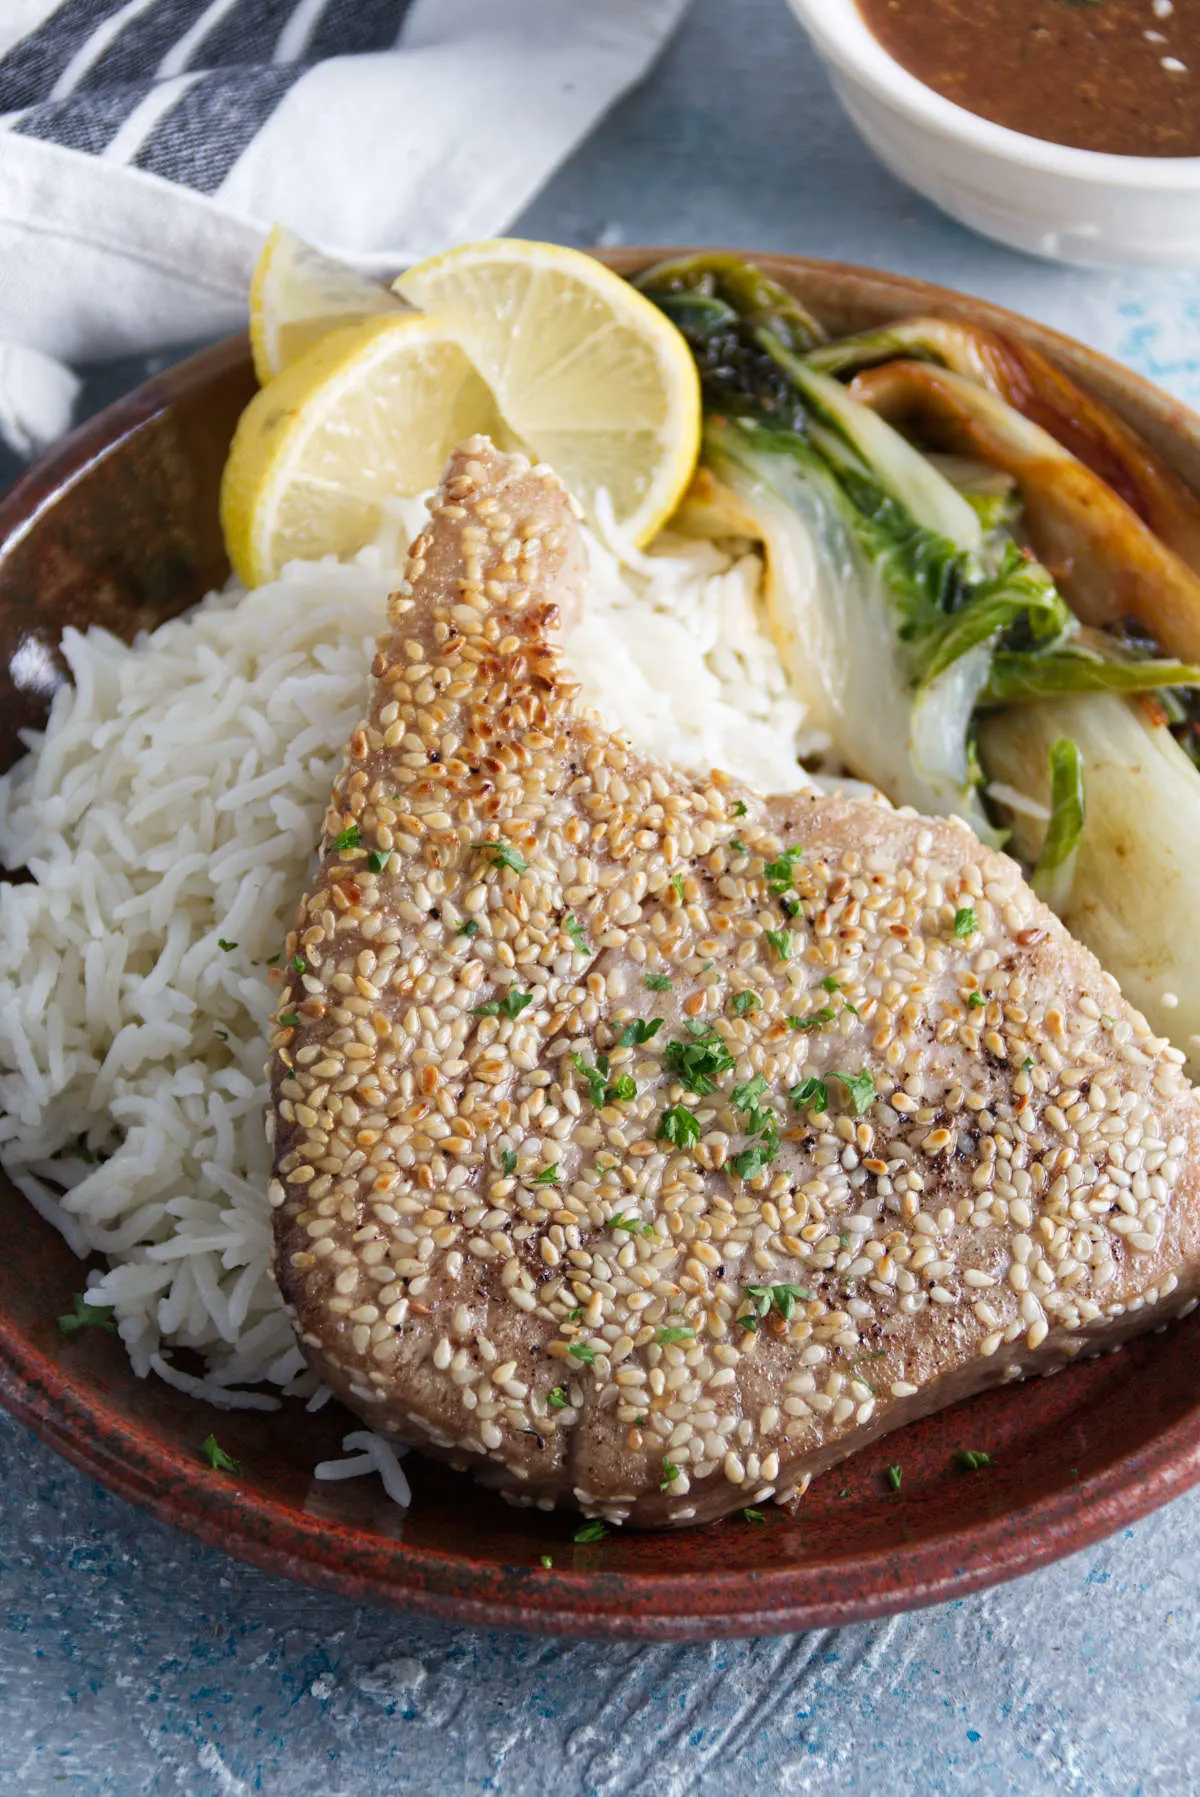 sesame crusted whole ahi tuna steaks plated on a bed of rice